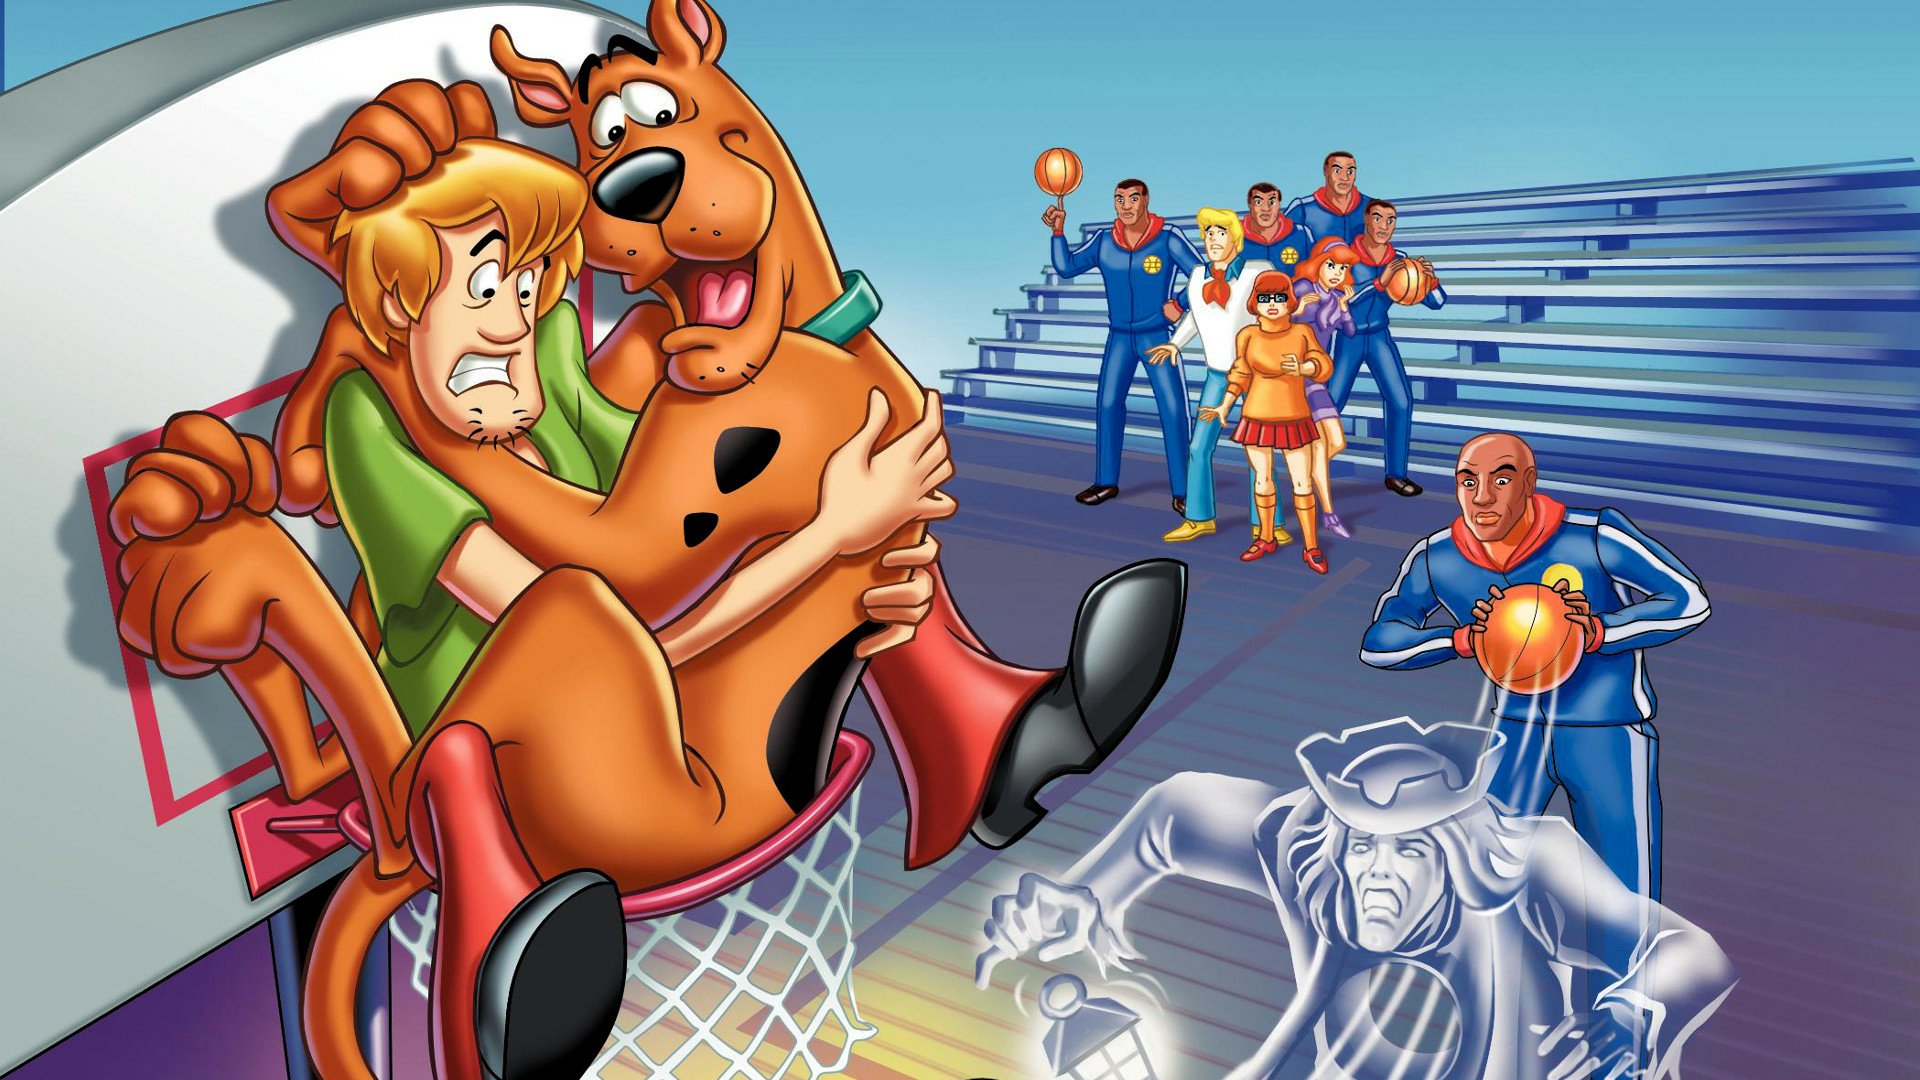 Scooby-Doo Meets The Harlem Globetrotters HD Wallpaper | Background